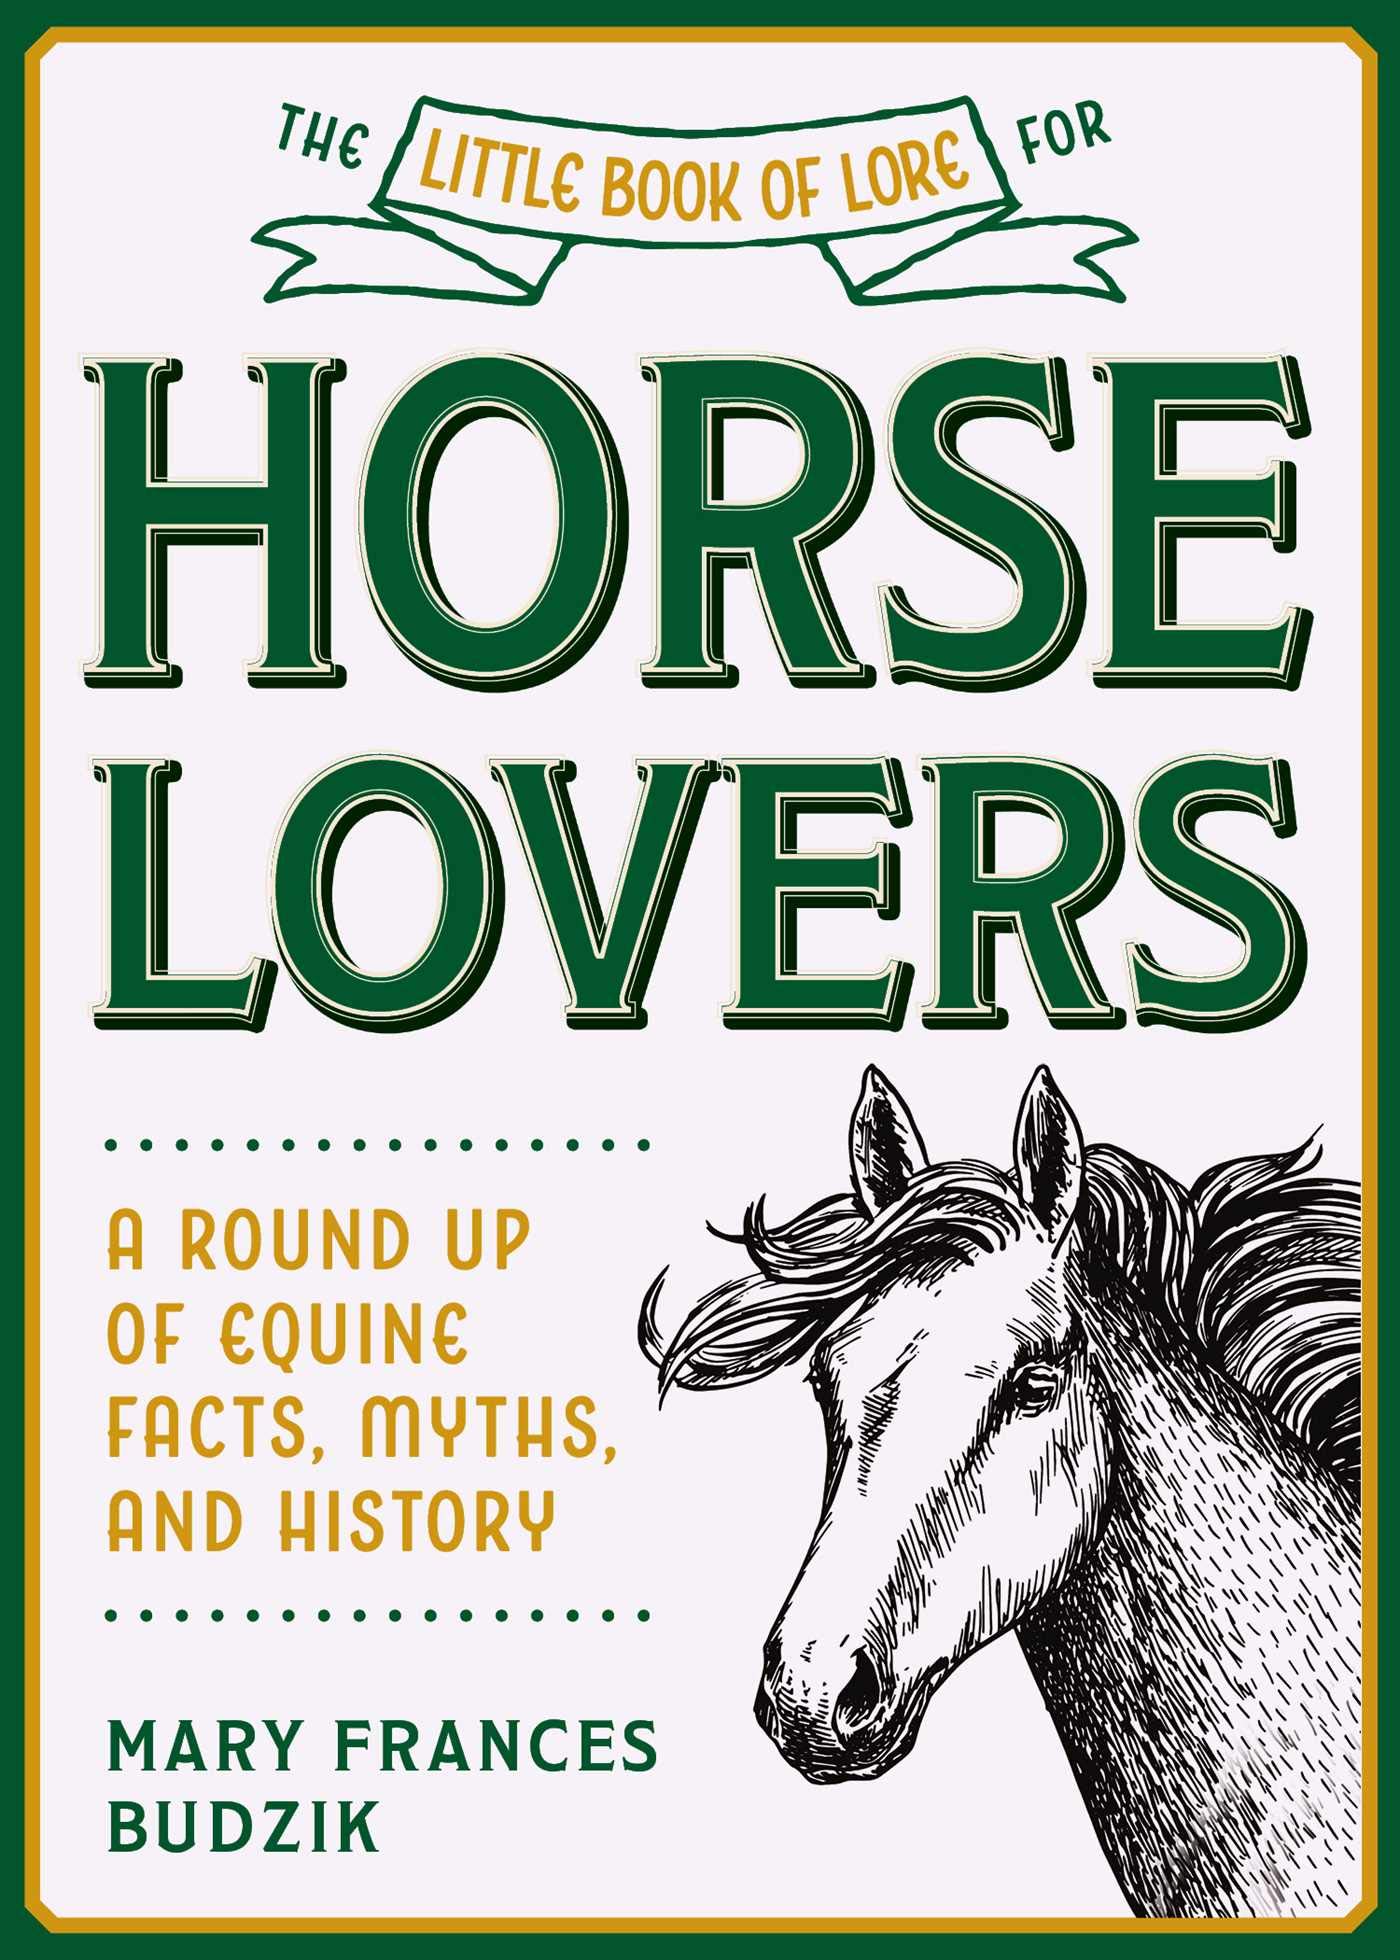 Little Book of Lore for Horse Lovers